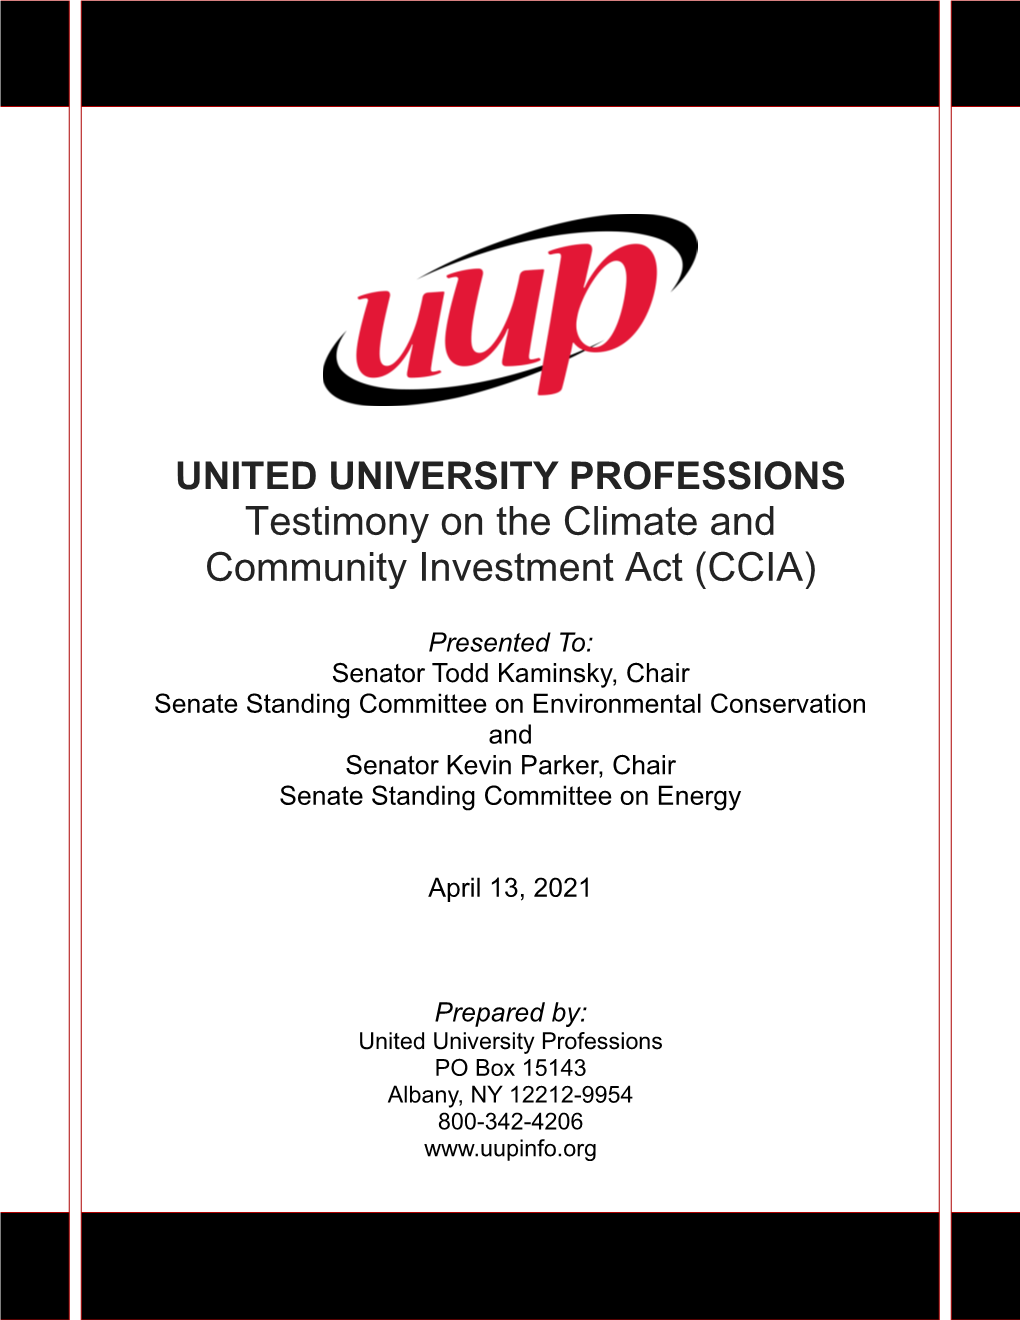 UNITED UNIVERSITY PROFESSIONS Testimony on the Climate and Community Investment Act (CCIA)